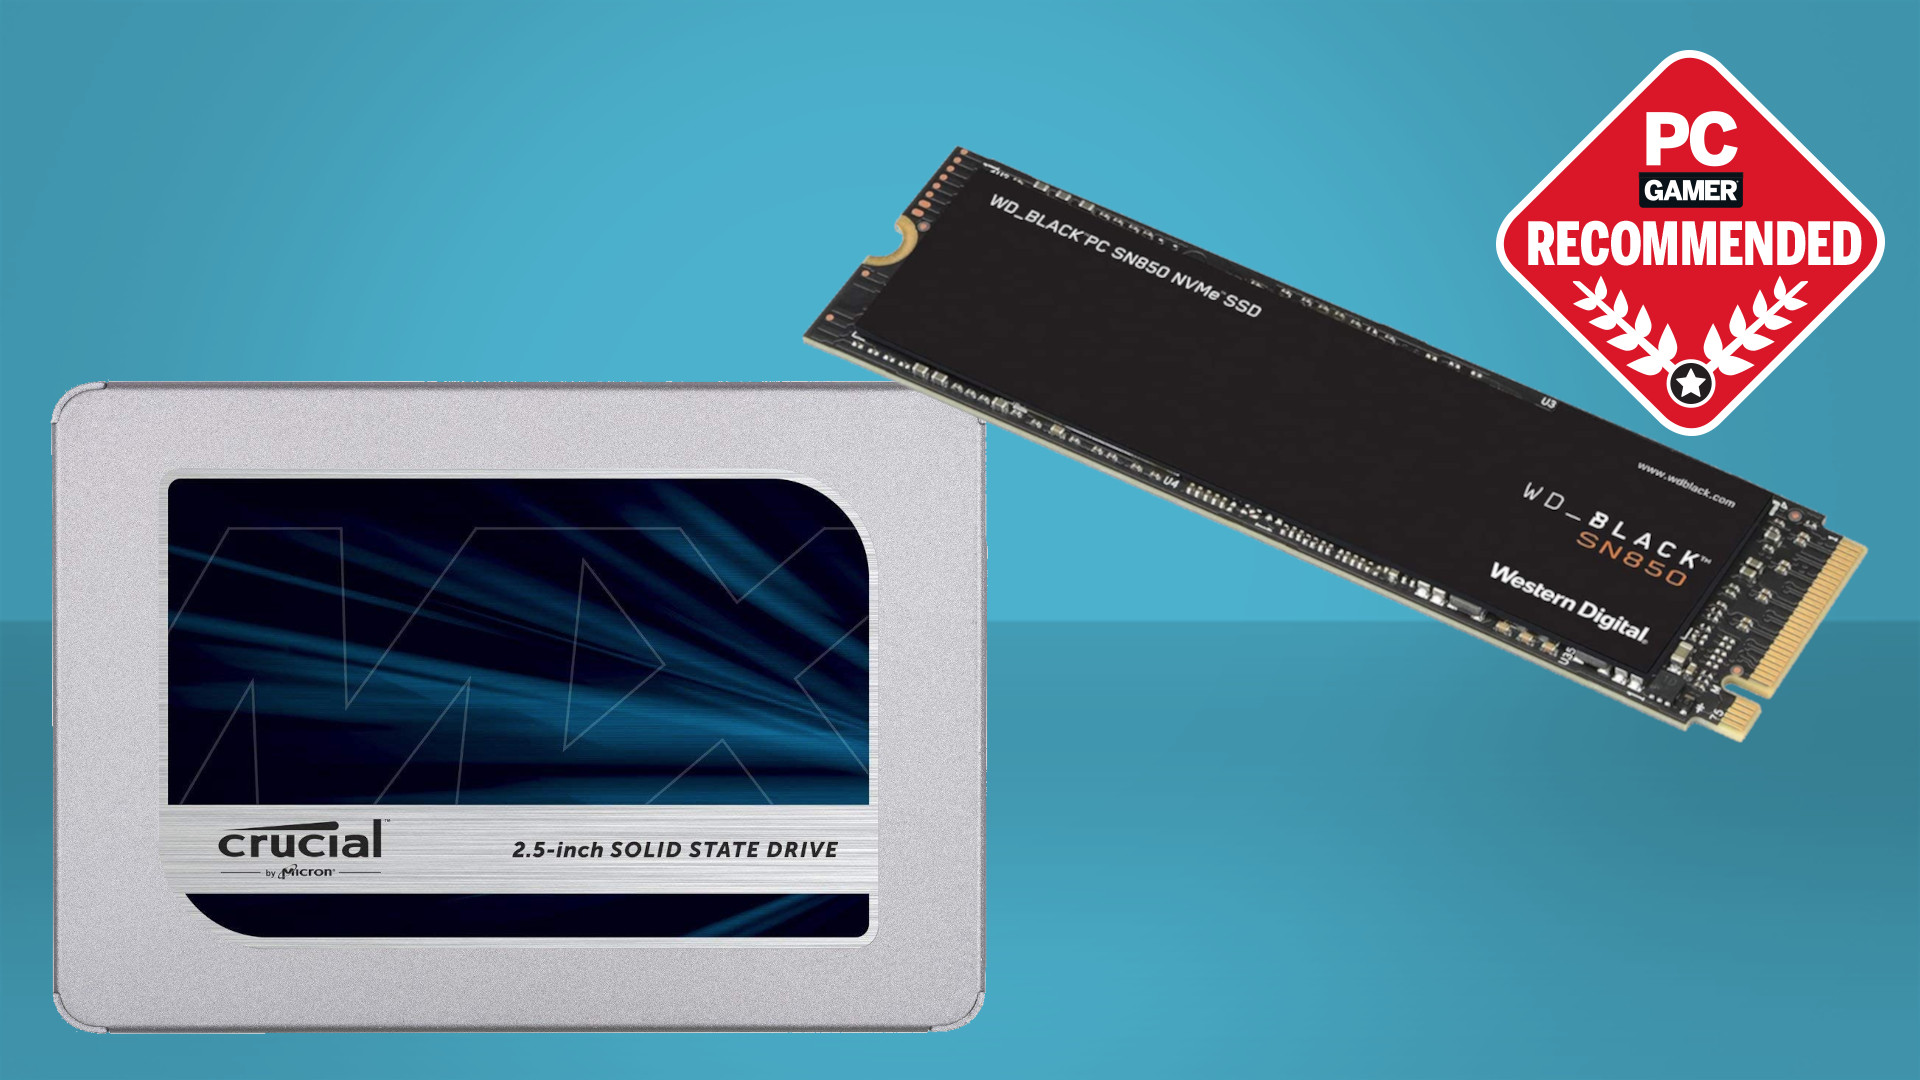 victory revolution Gather Best SSD for gaming in 2022 | PC Gamer